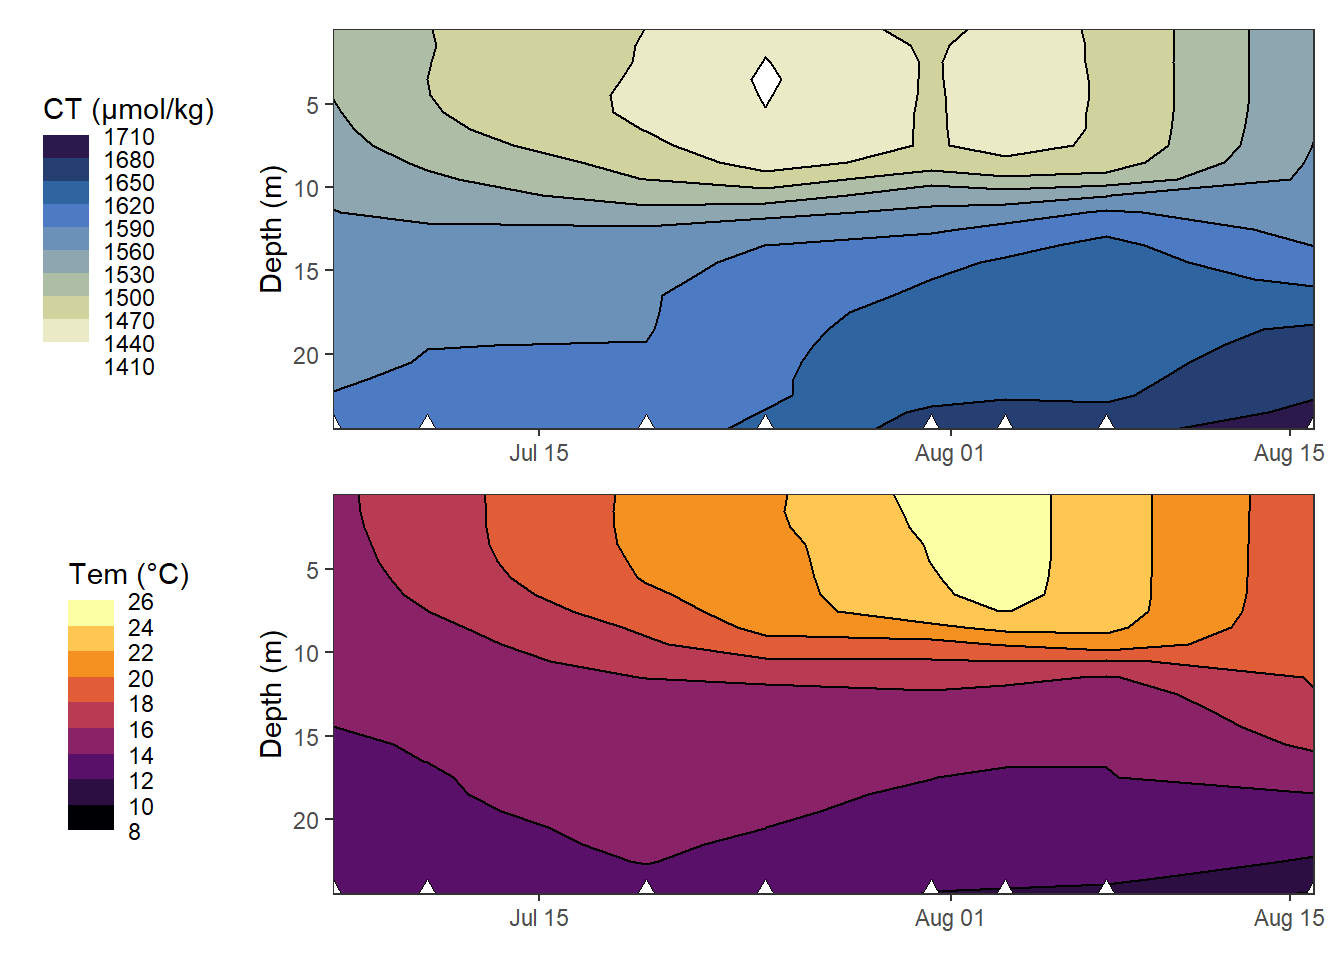 Hovmoeller plots of absolute changes in C~T~ and temperature.